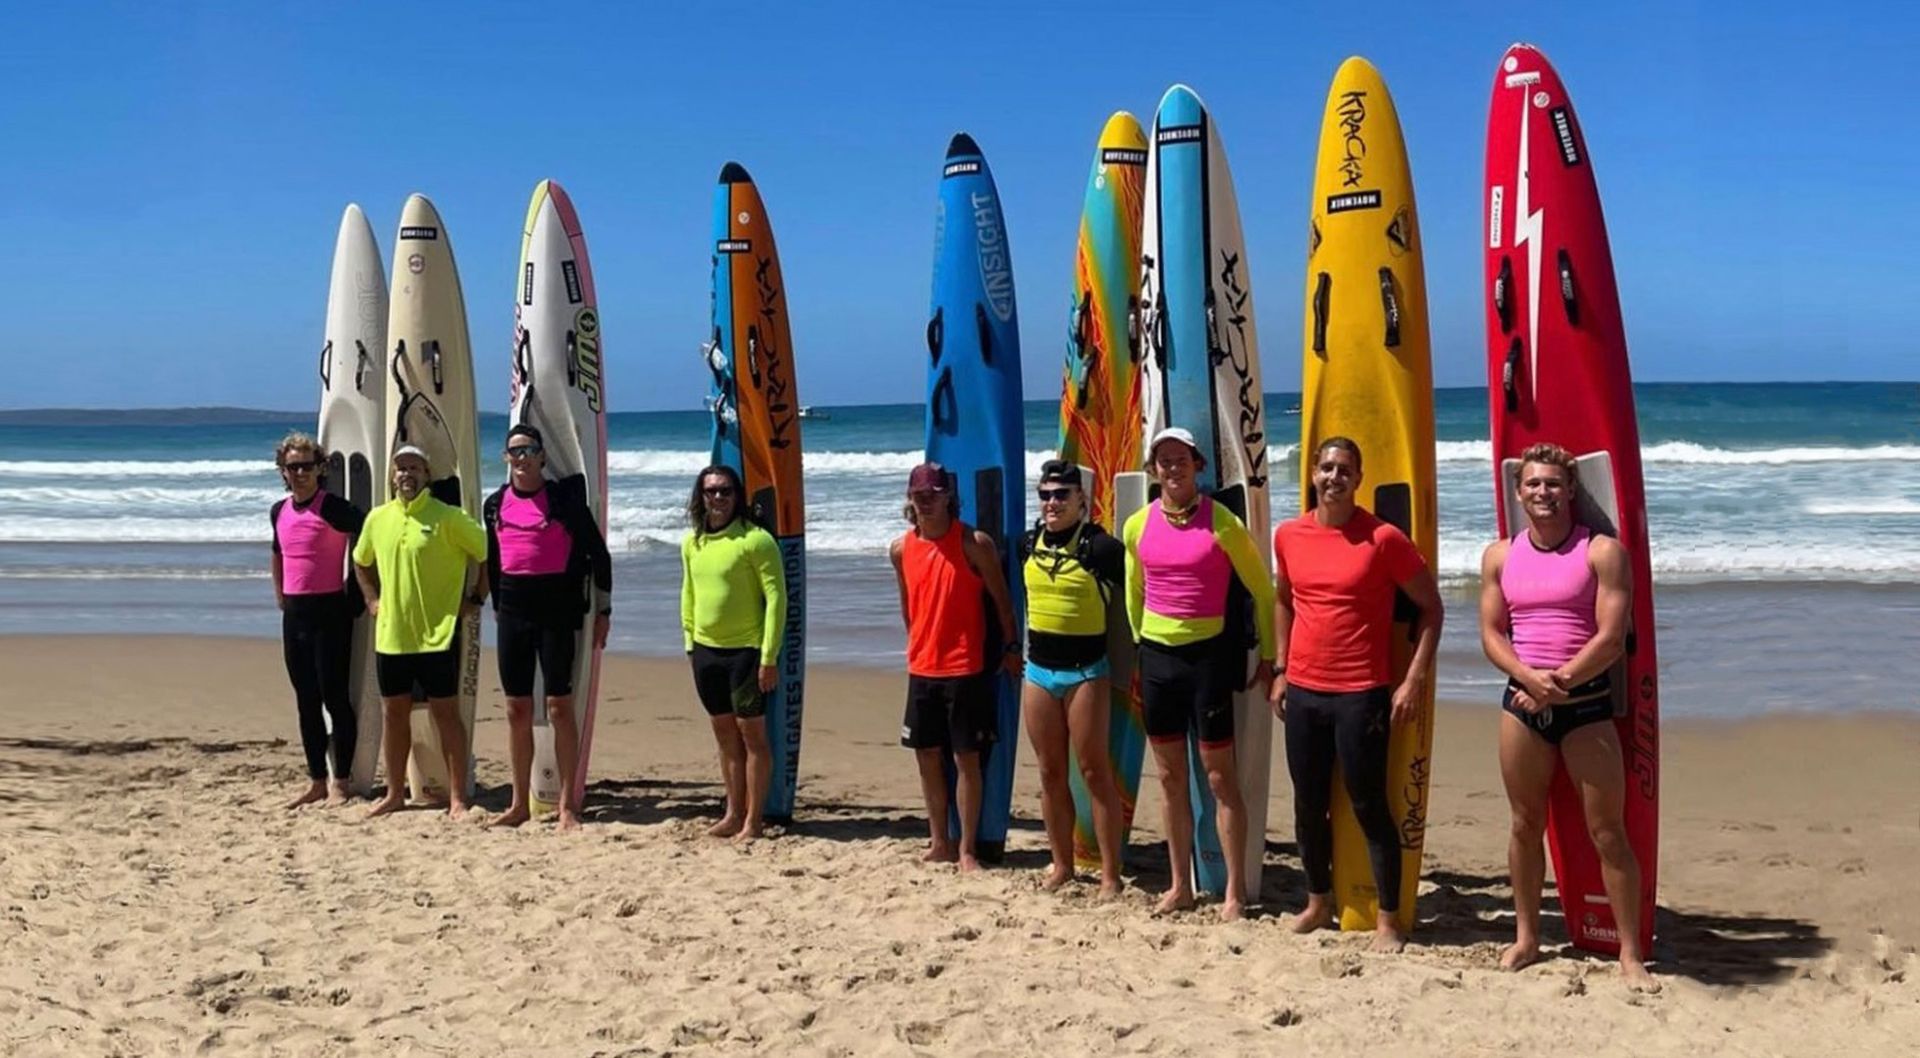 Paddle boarders gather on the beach for a photo.